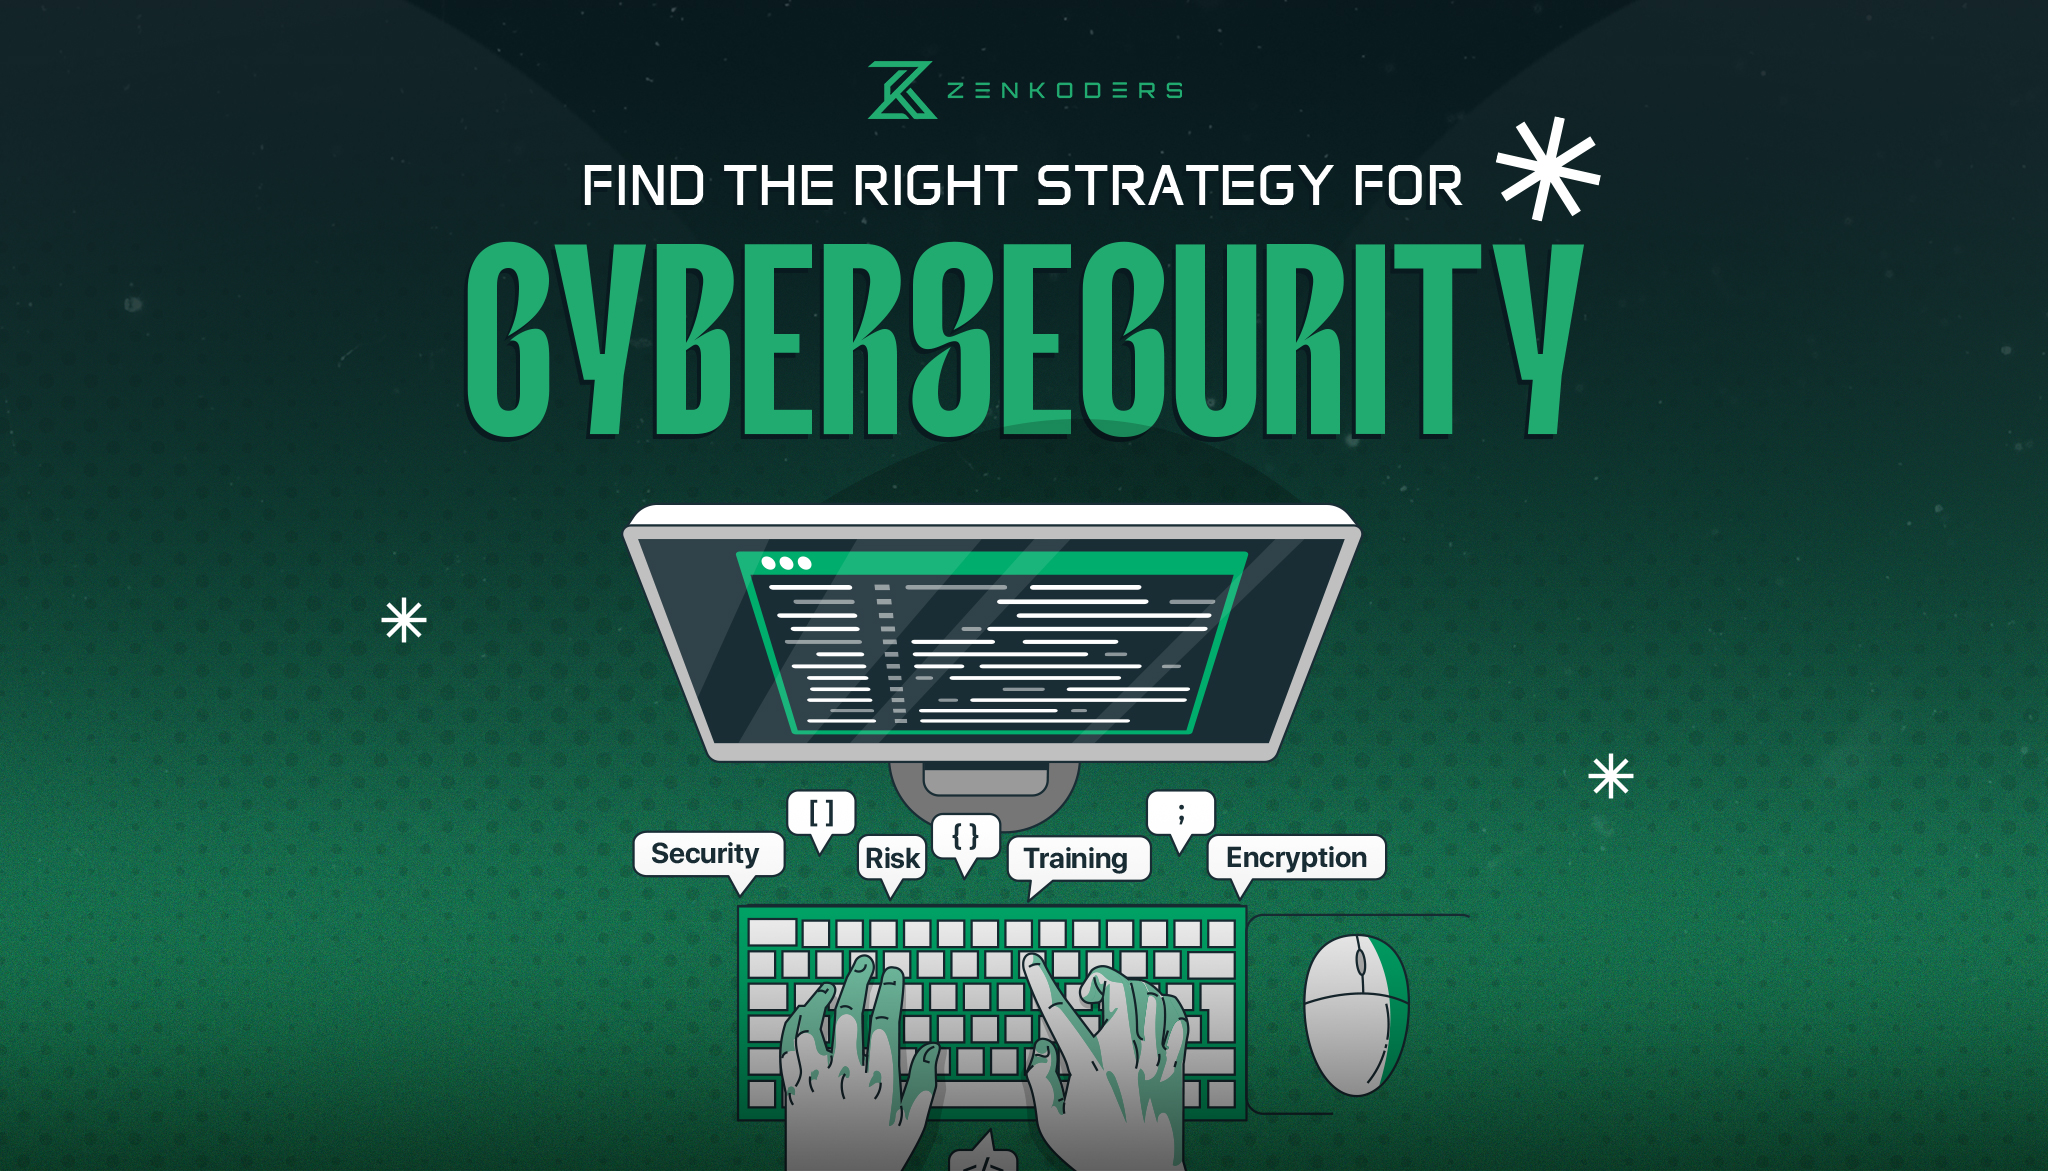 Finding the Right Strategy for Cybersecurity